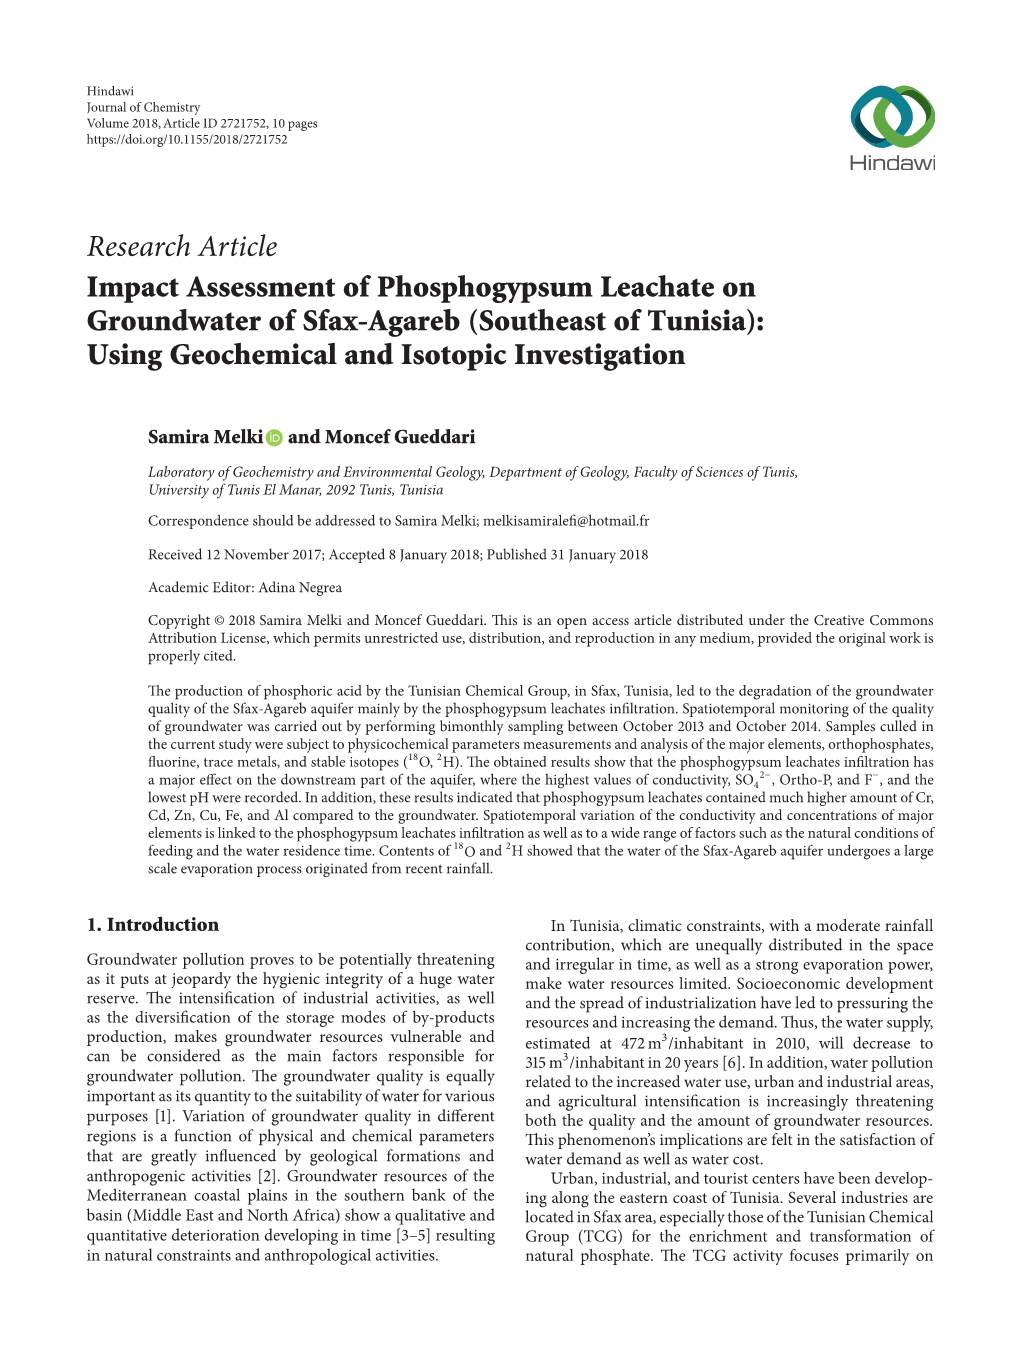 Impact Assessment of Phosphogypsum Leachate on Groundwater of Sfax-Agareb (Southeast of Tunisia): Using Geochemical and Isotopic Investigation